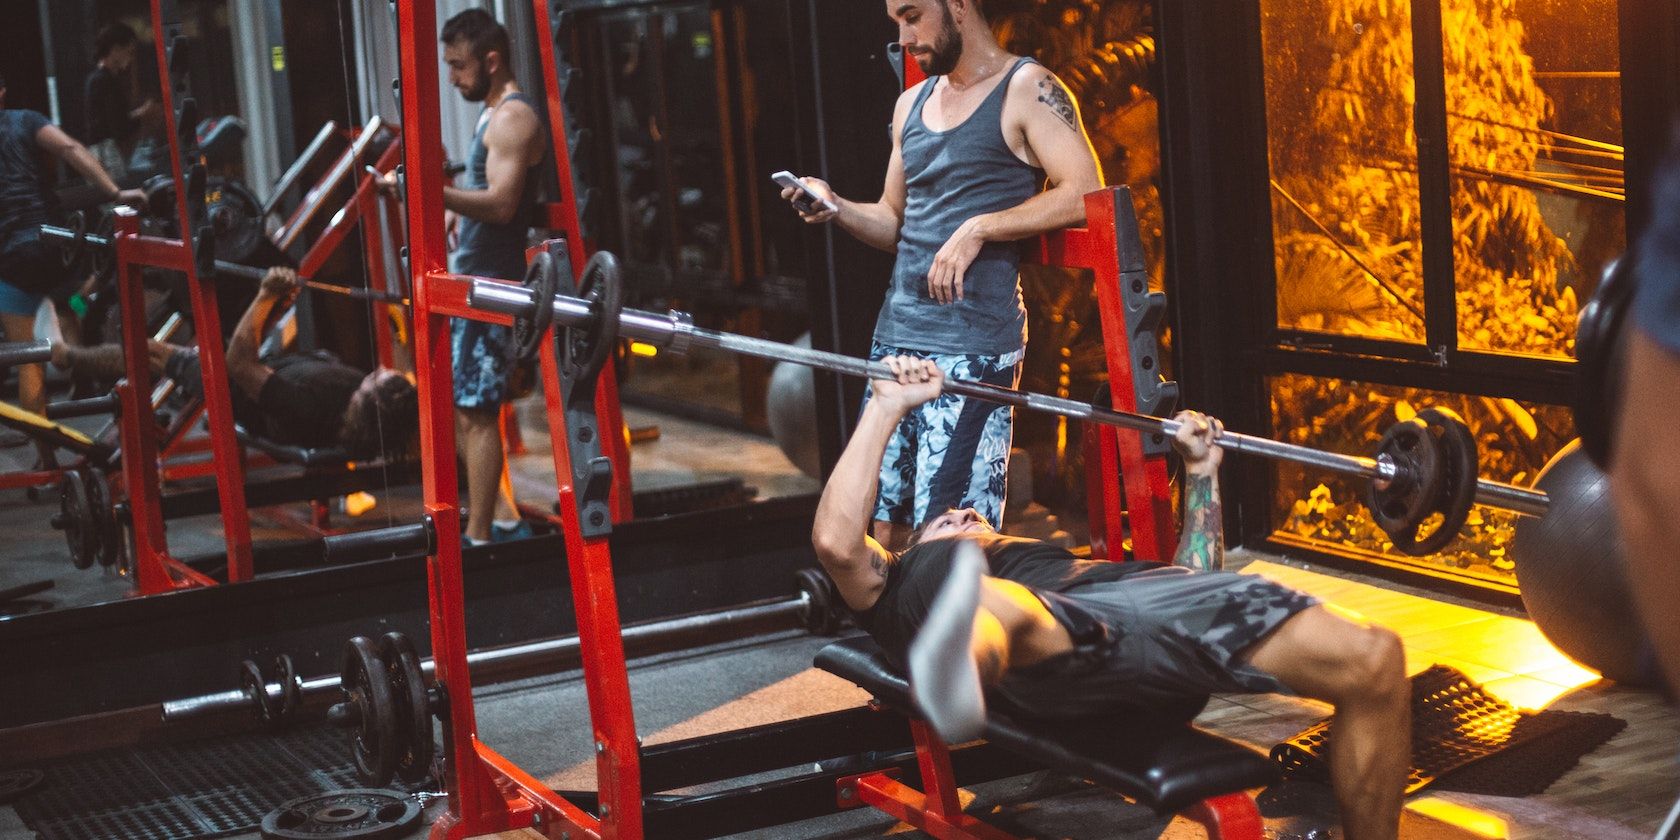 Man struggling with barbell bench press while spotter uses phone